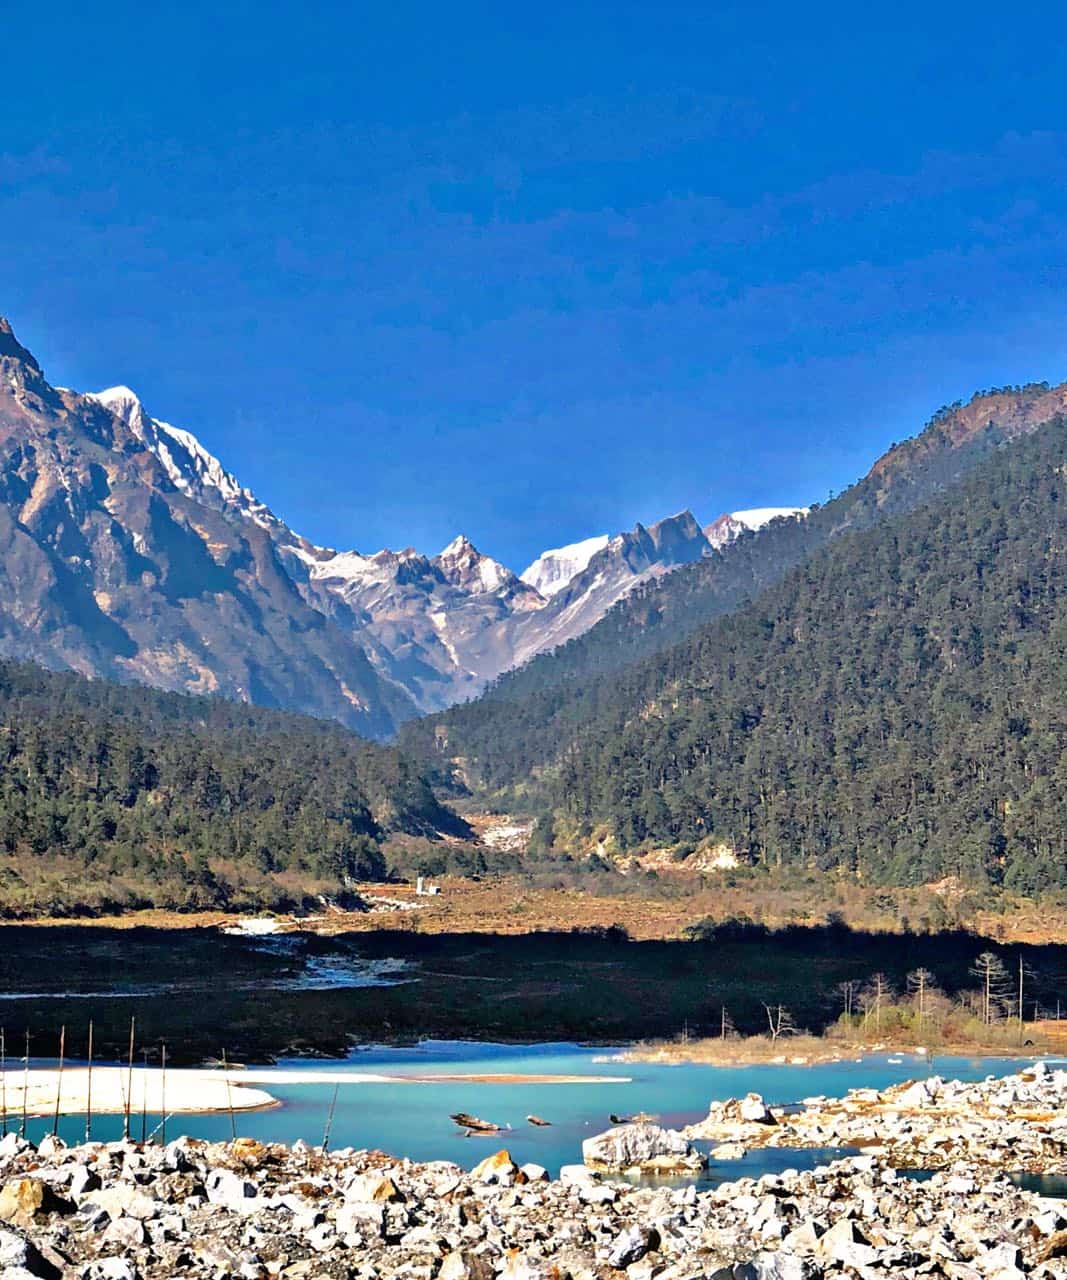 Sikkim, like a painting